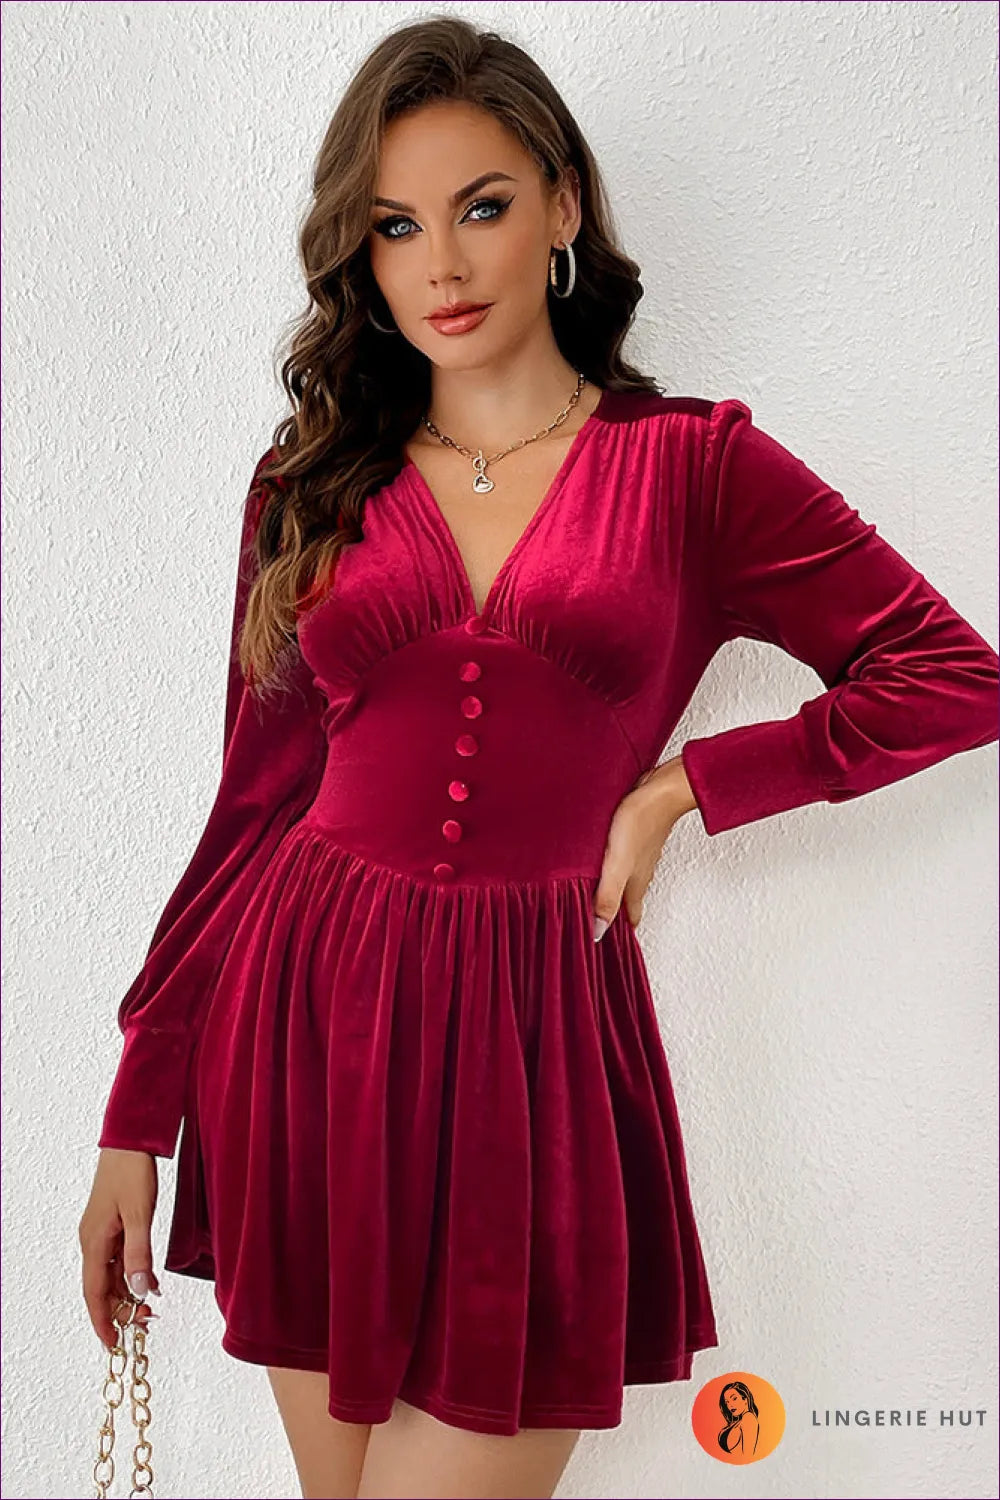 Step Into Seasonal Elegance With Lingerie Hut’s Tight Waist Velvet Party Dress. Perfect For Autumn And Winter